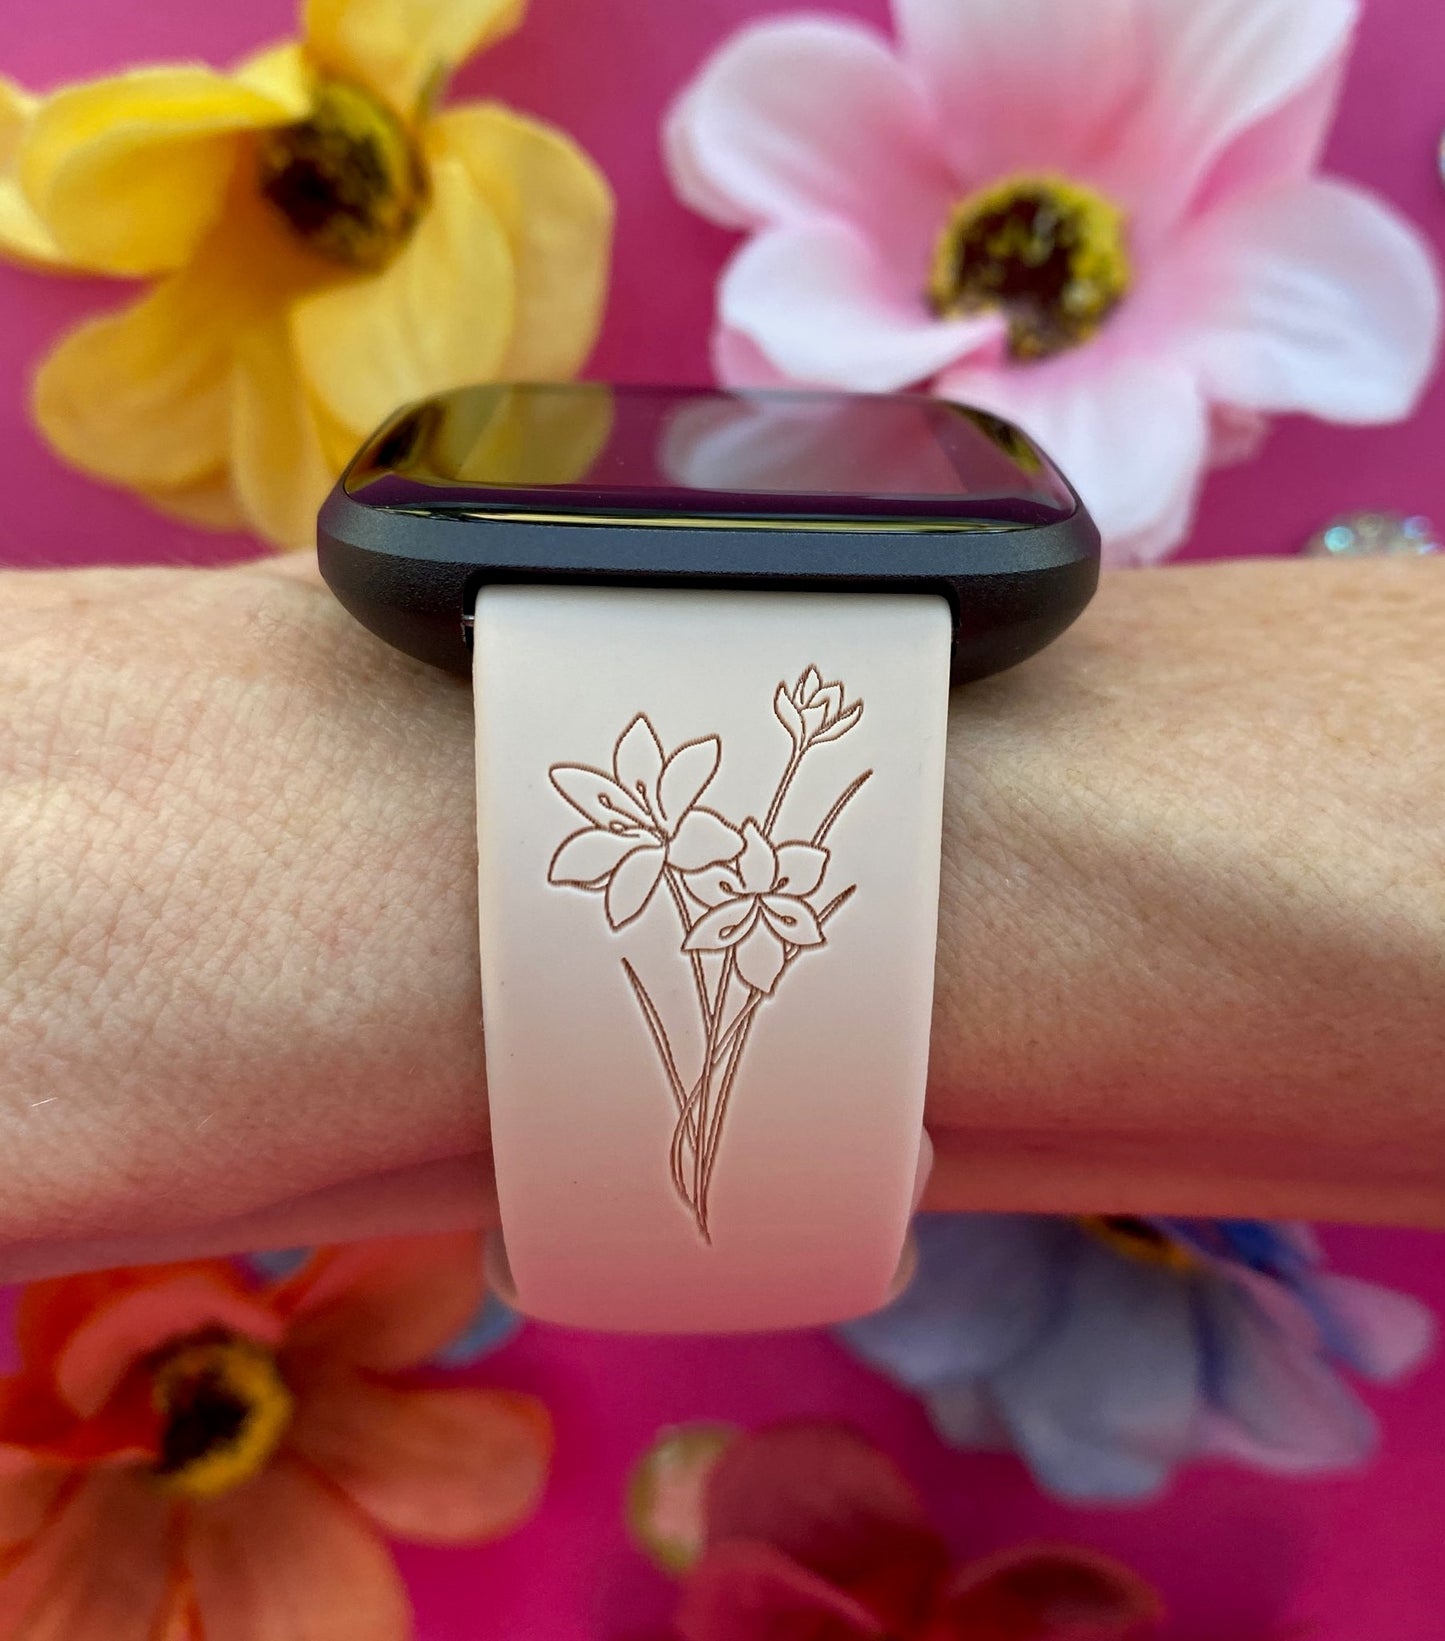 Mother's Day Fitbit Versa 1/2 Watch Band